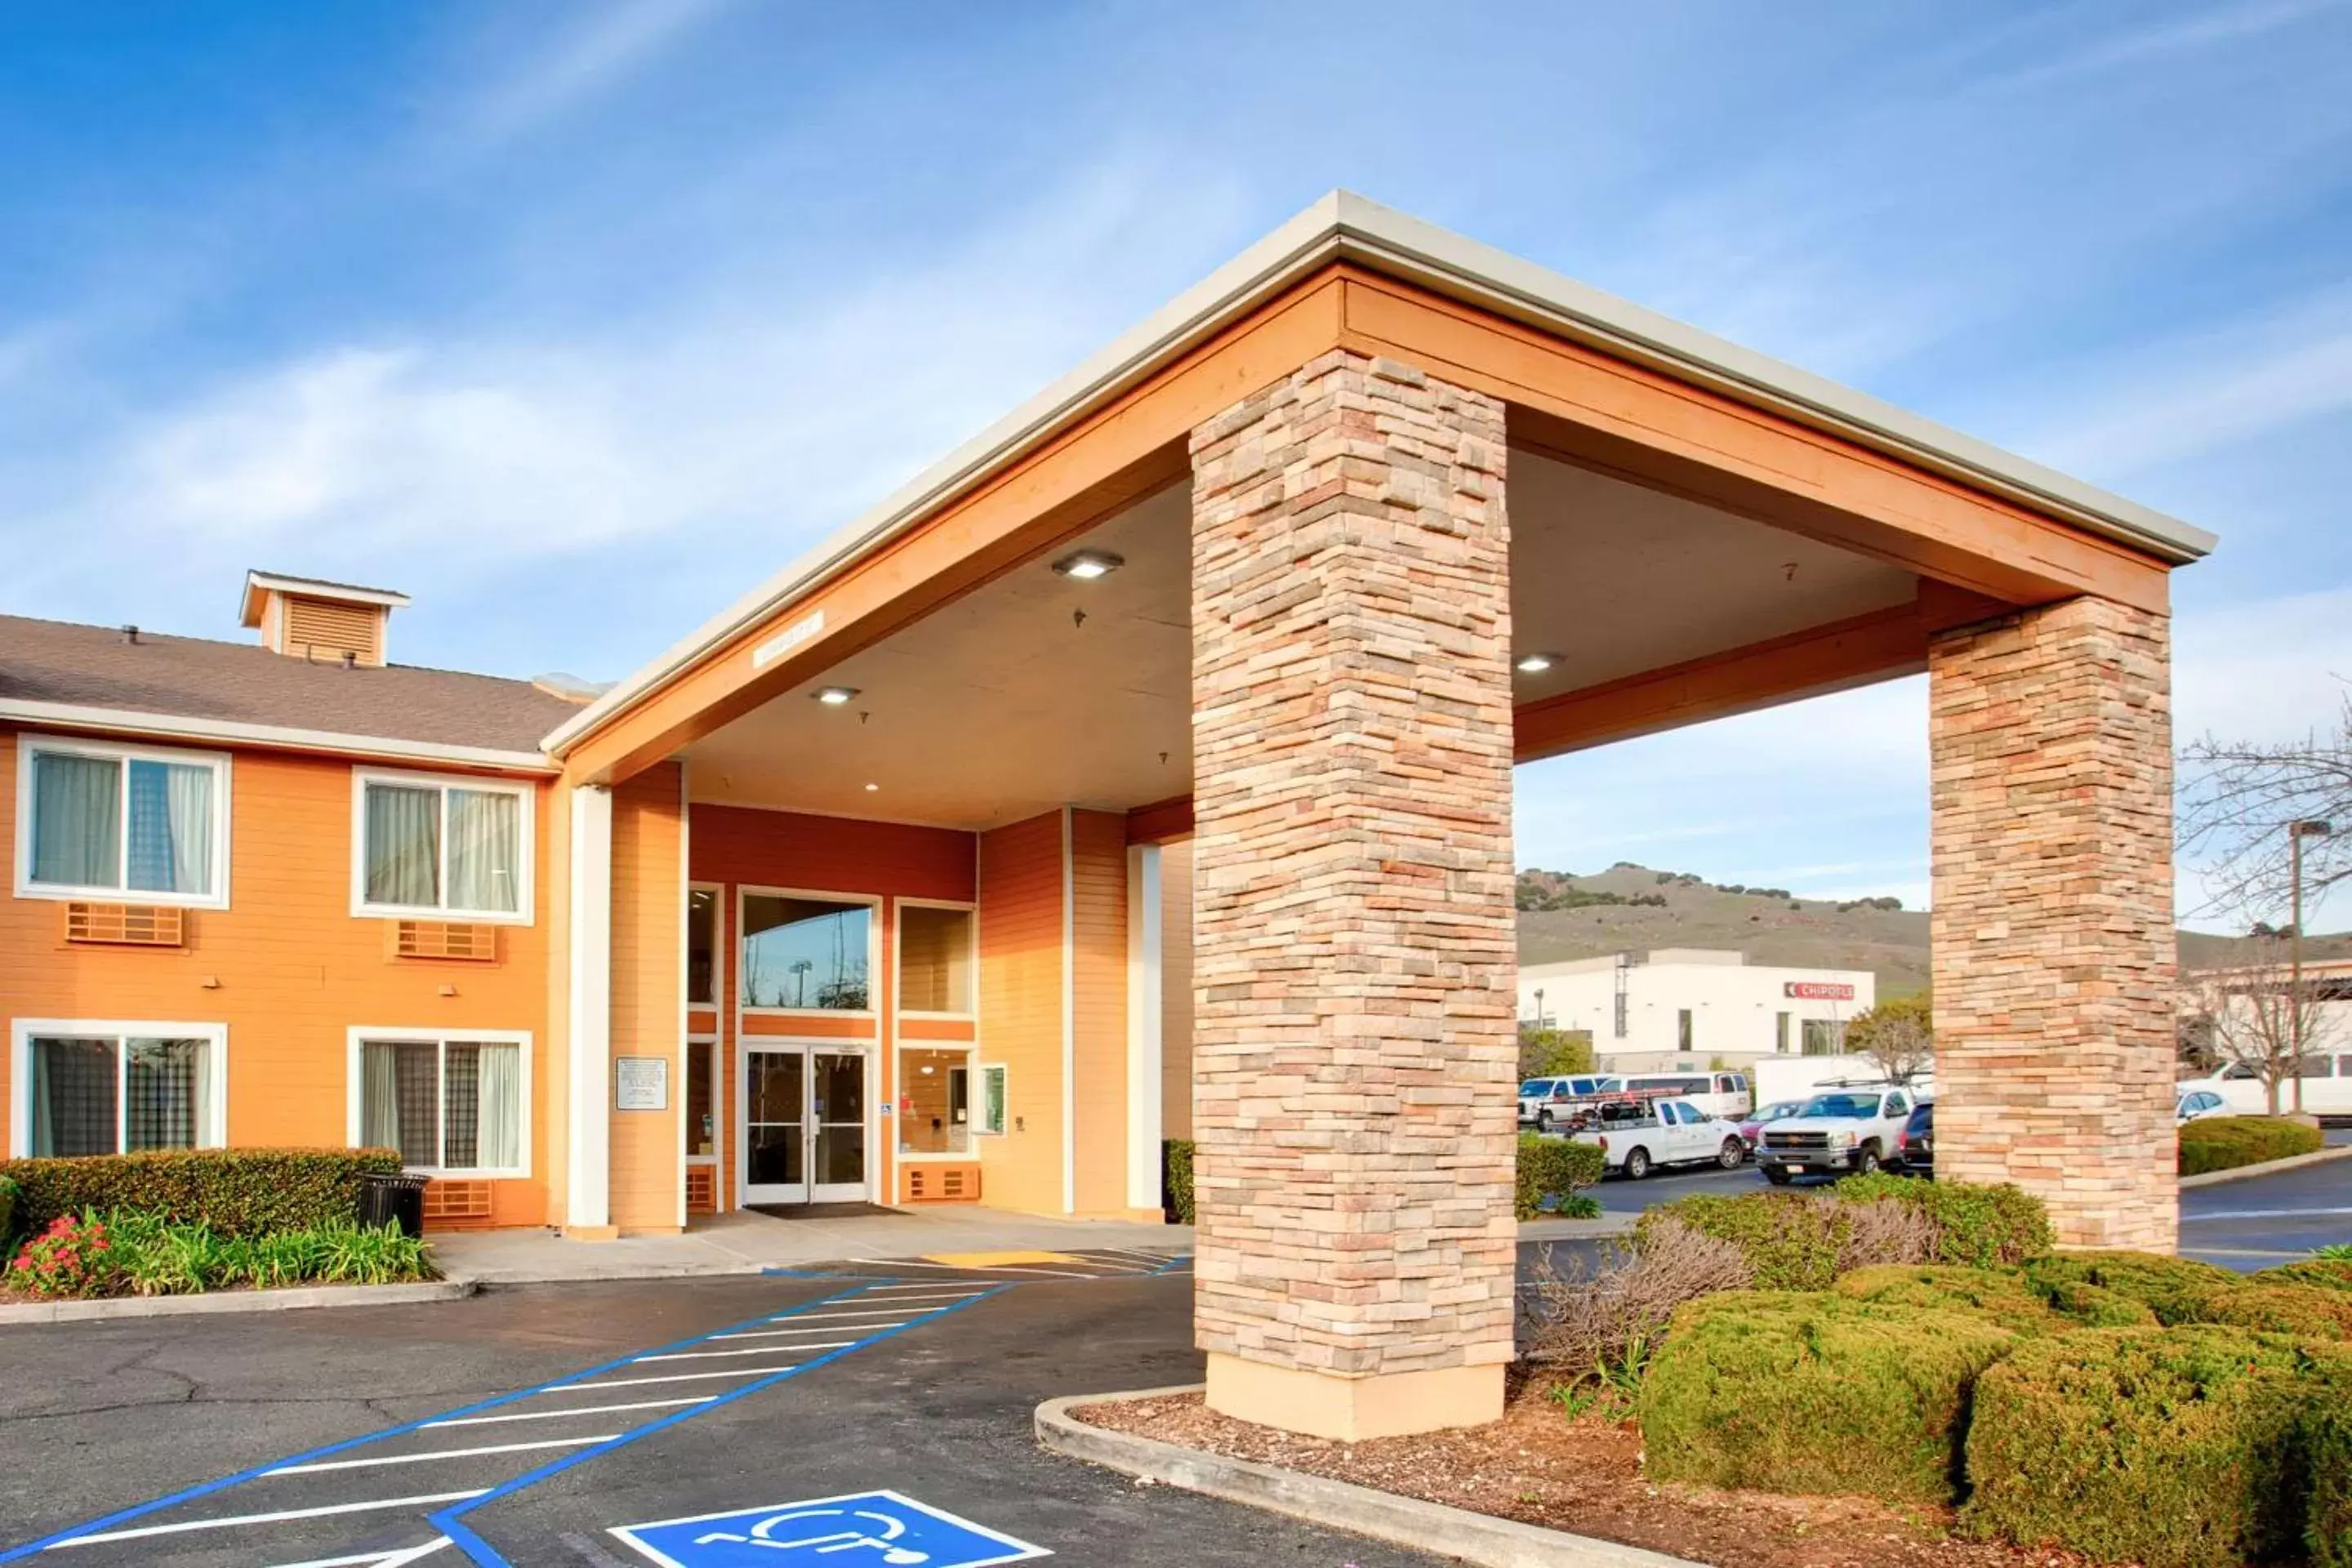 Property Building in Quality Inn near Six Flags Discovery Kingdom-Napa Valley